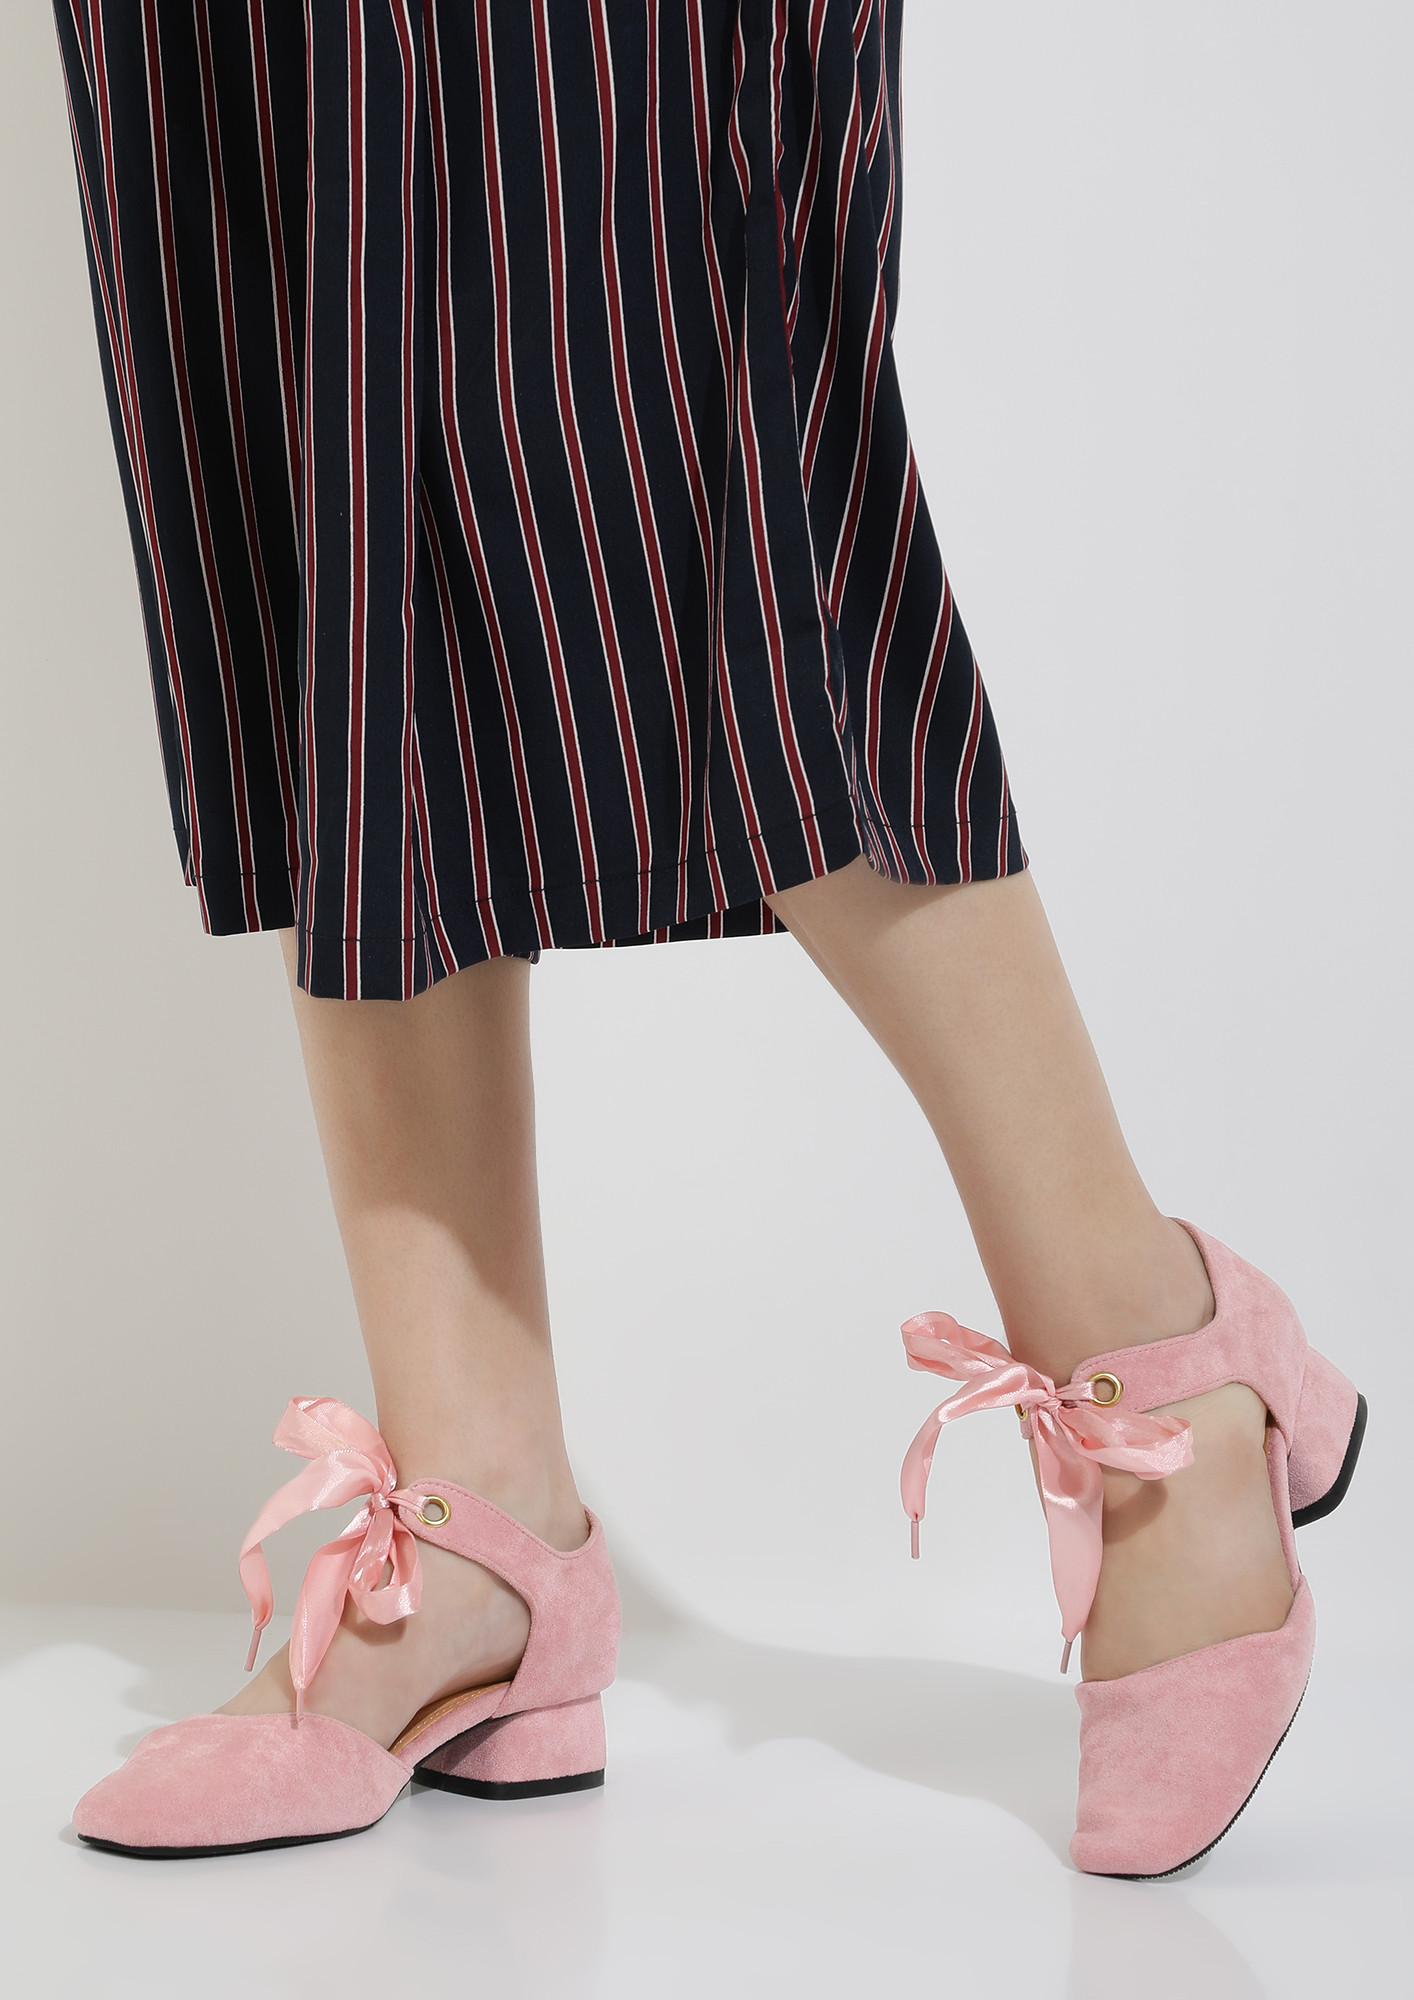 TIE ME KNOT PINK HEELED SHOES